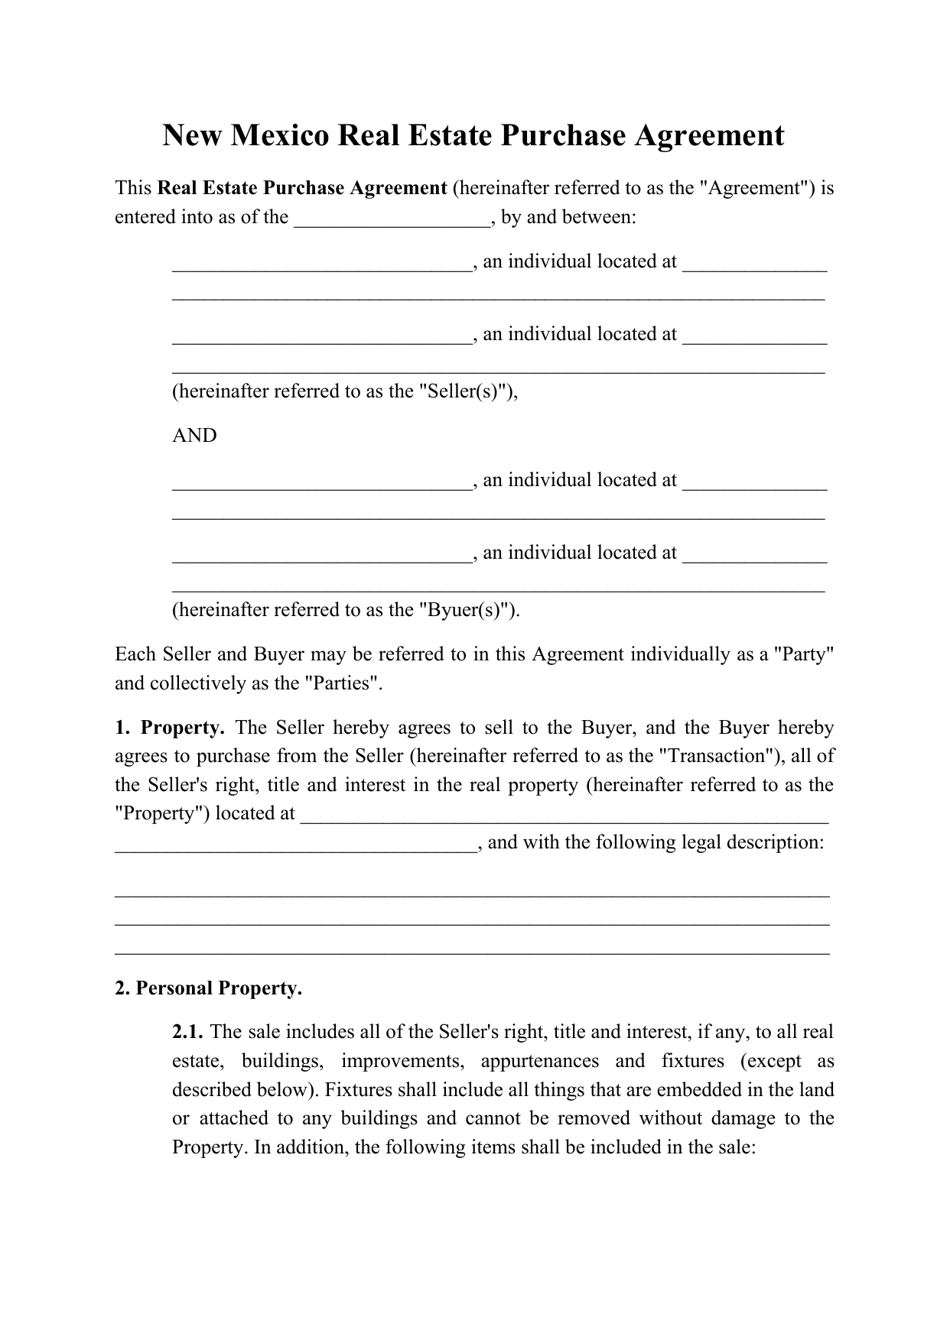 Real Estate Purchase Agreement Template - New Mexico, Page 1